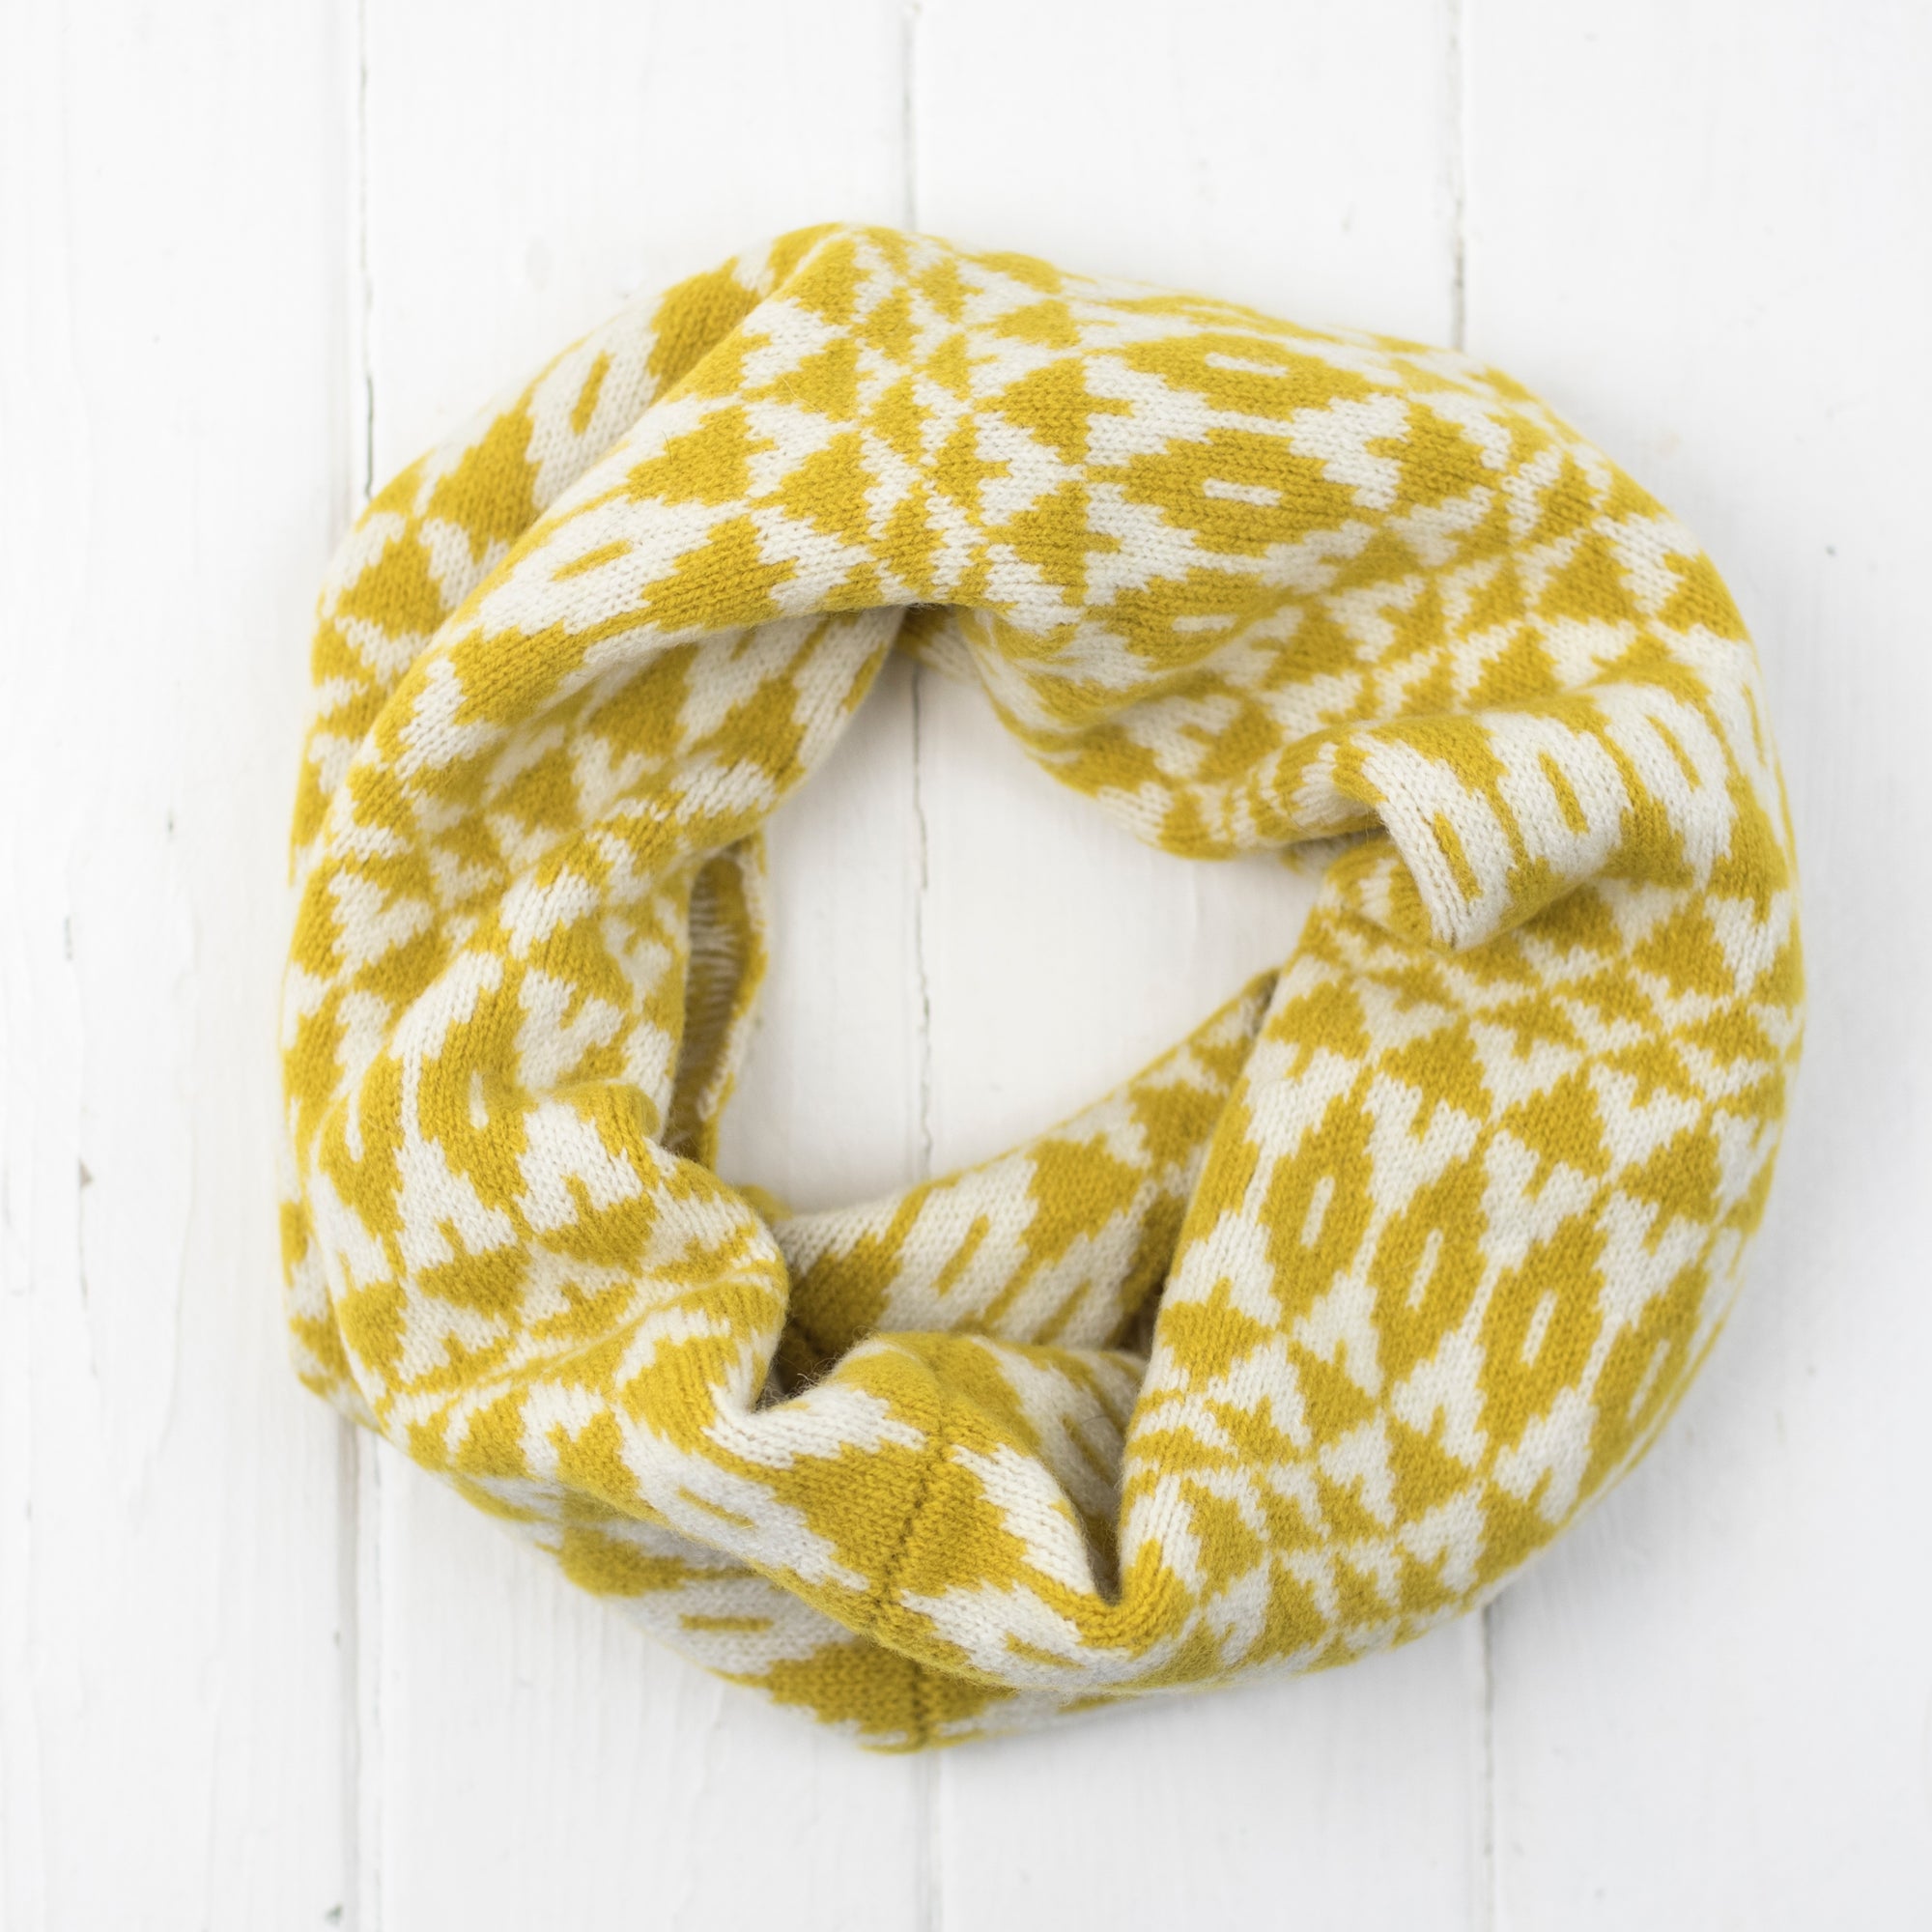 Mirror snood / cowl - piccalilli and cream (MADE TO ORDER)